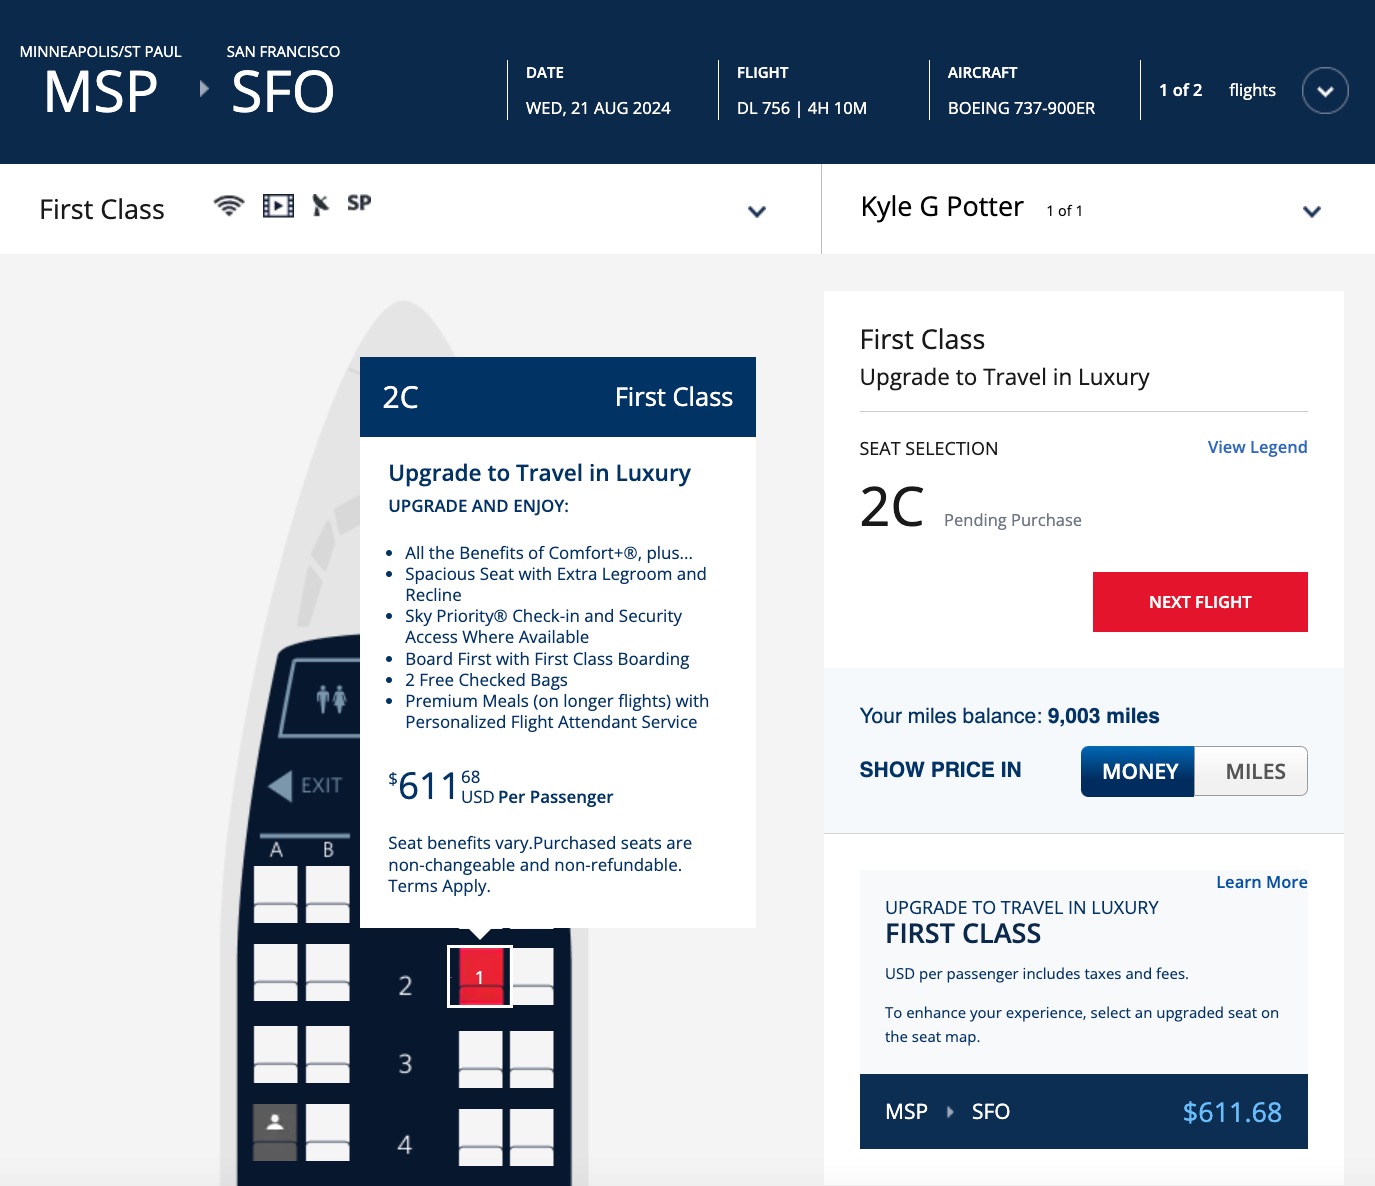 upgrade chart with Delta